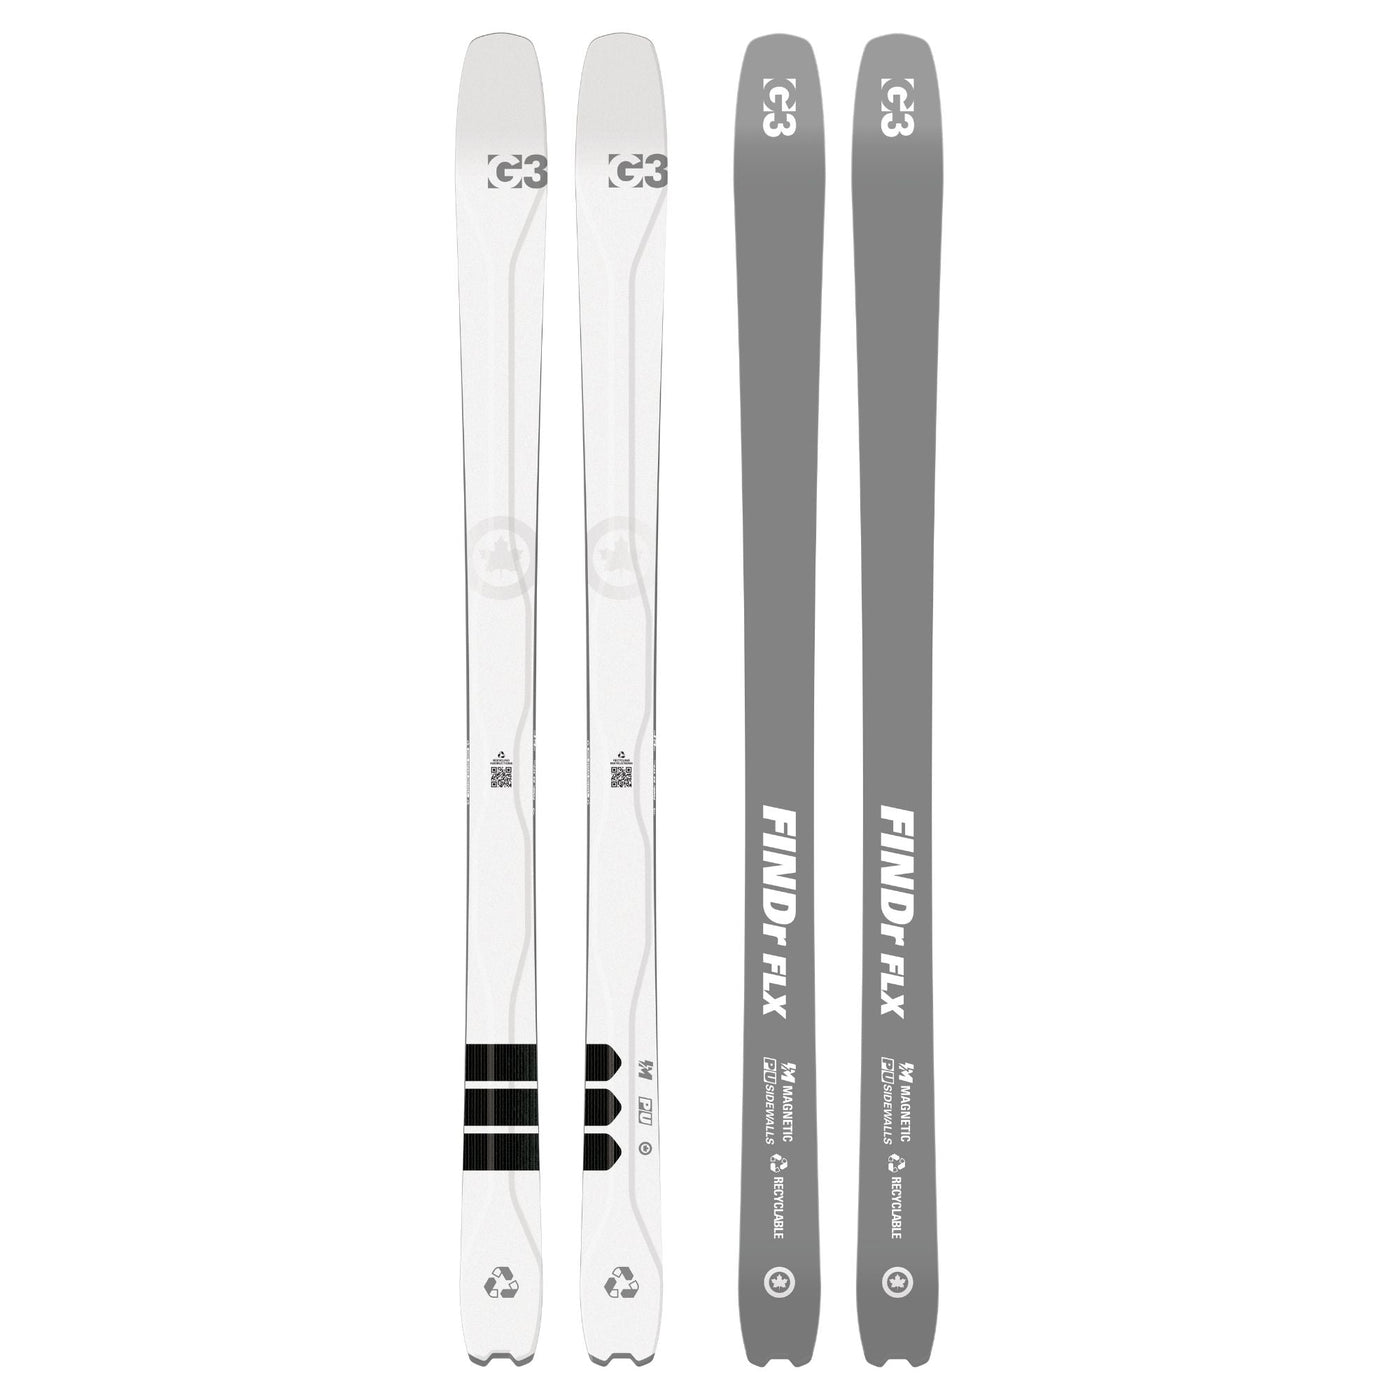 studio photo of findr flx r3 94 skis